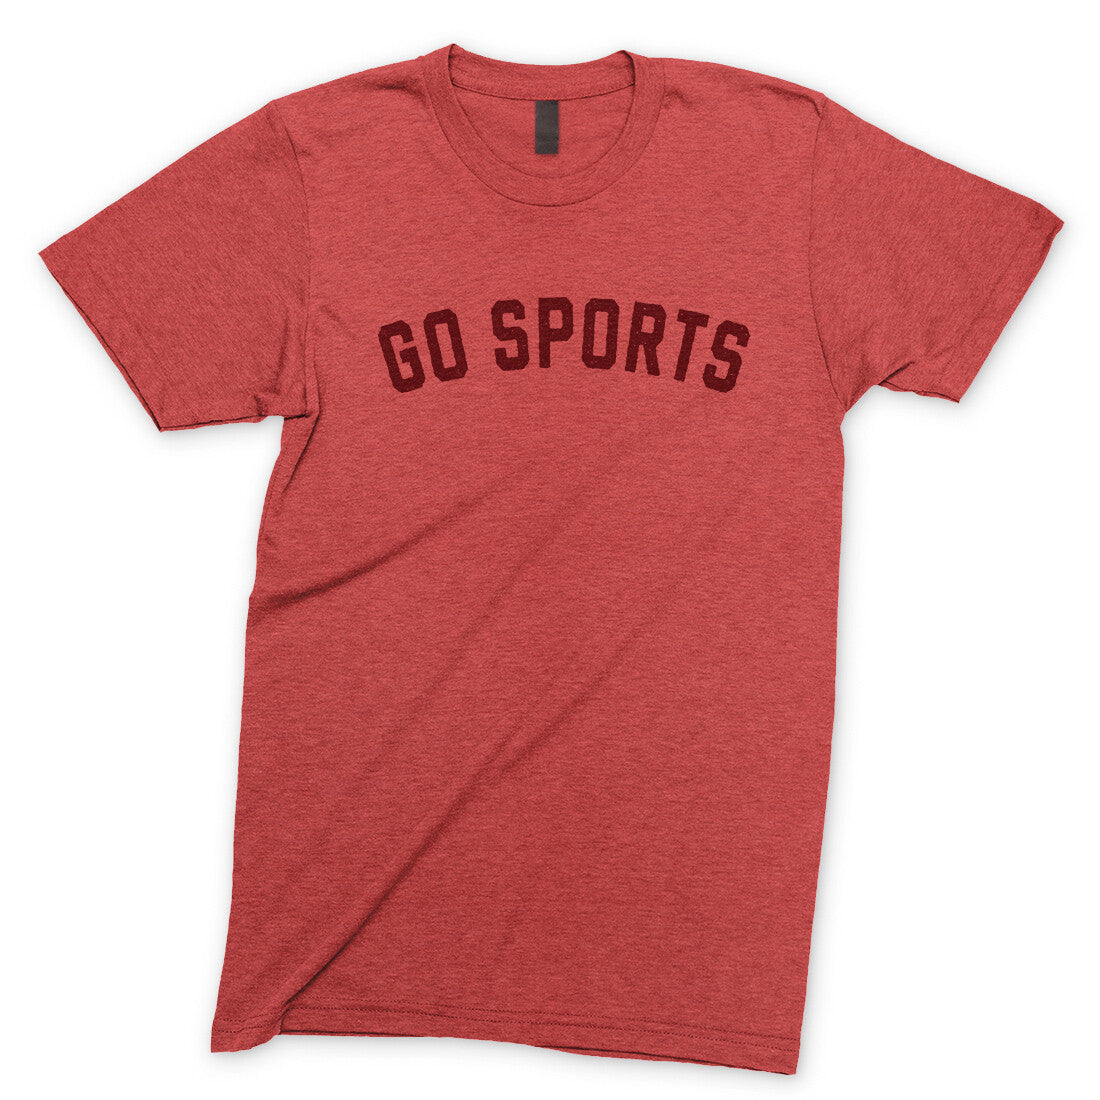 Go Sports in Heather Red Color